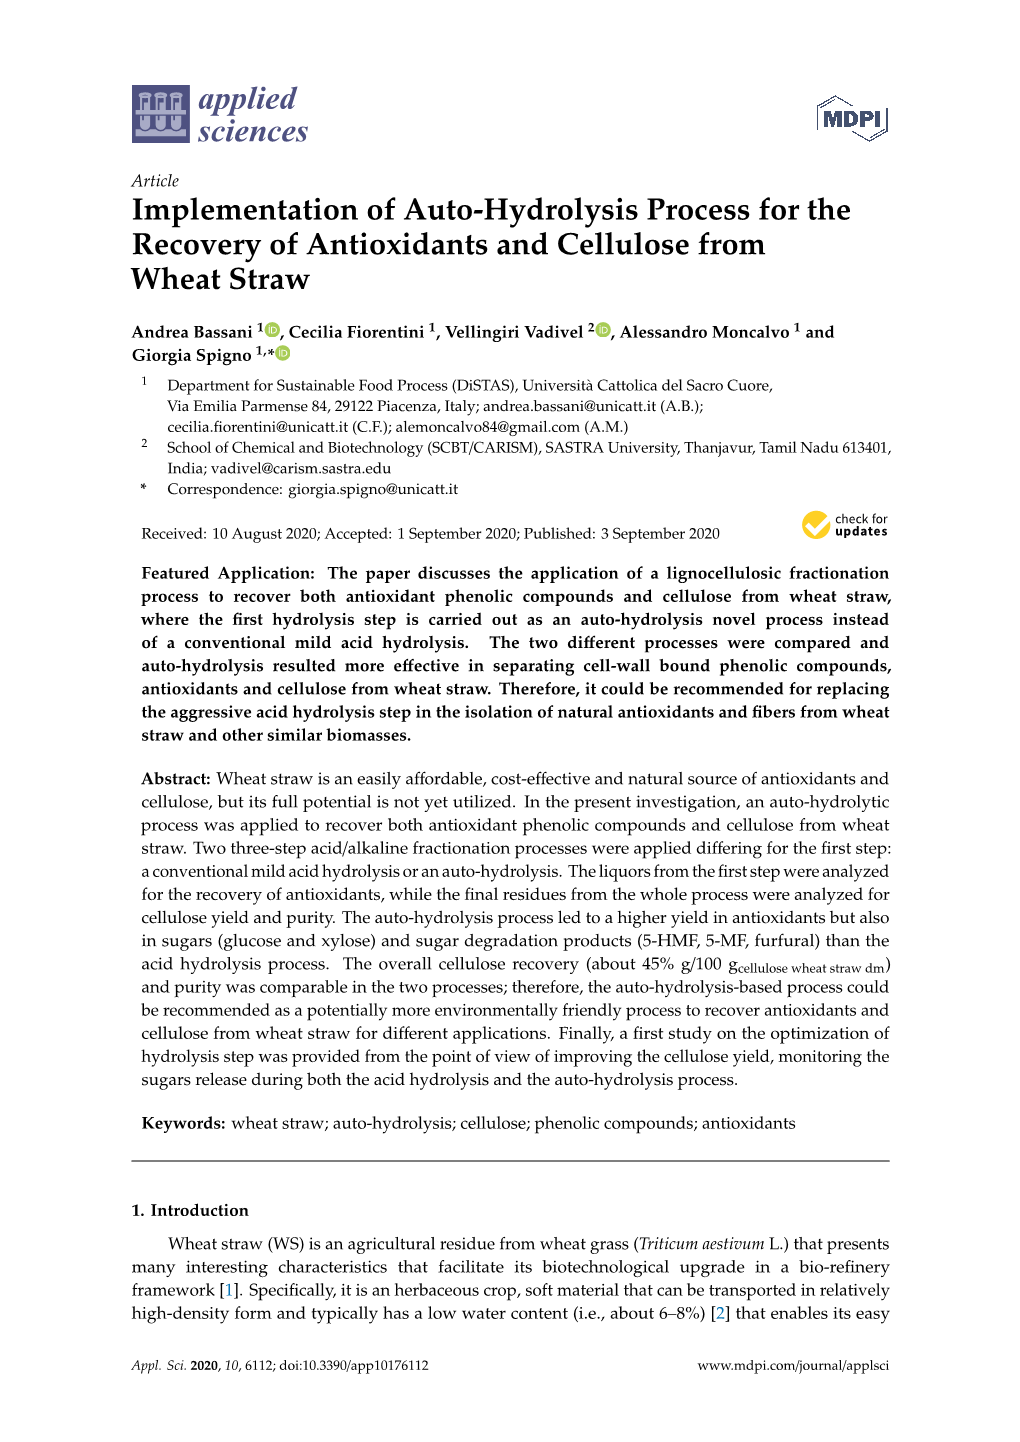 Implementation of Auto-Hydrolysis Process for the Recovery of Antioxidants and Cellulose from Wheat Straw